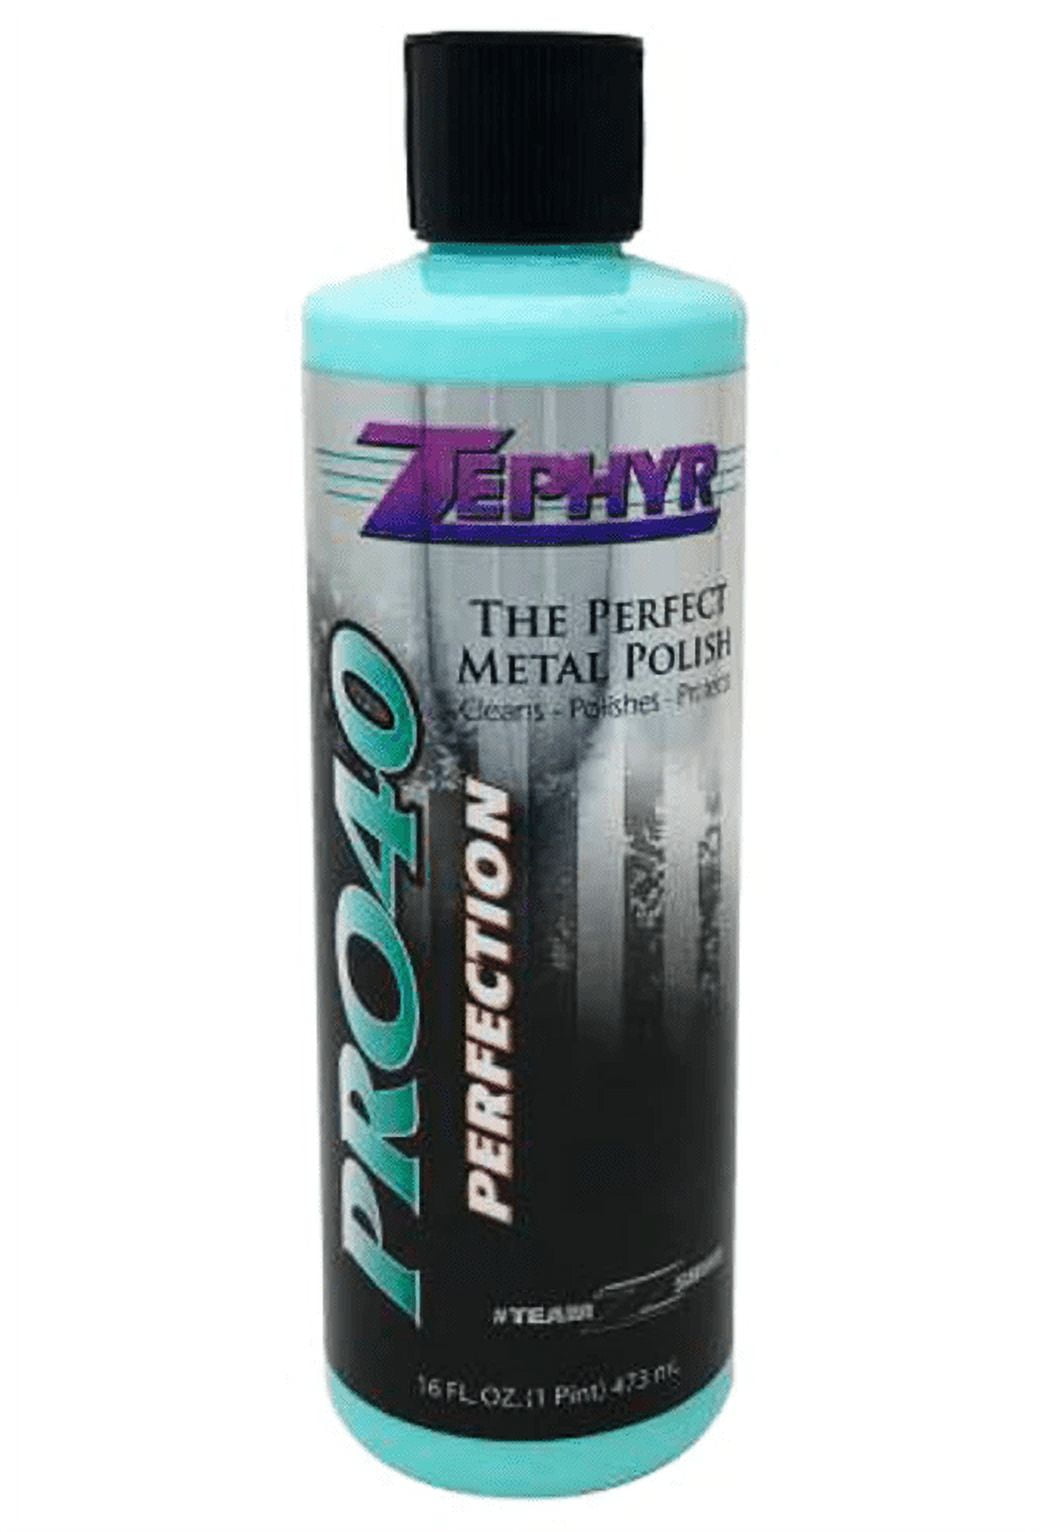 Zephyr (5 Piece) Buffing Kit - Includes with Pro-40 Metal Polish